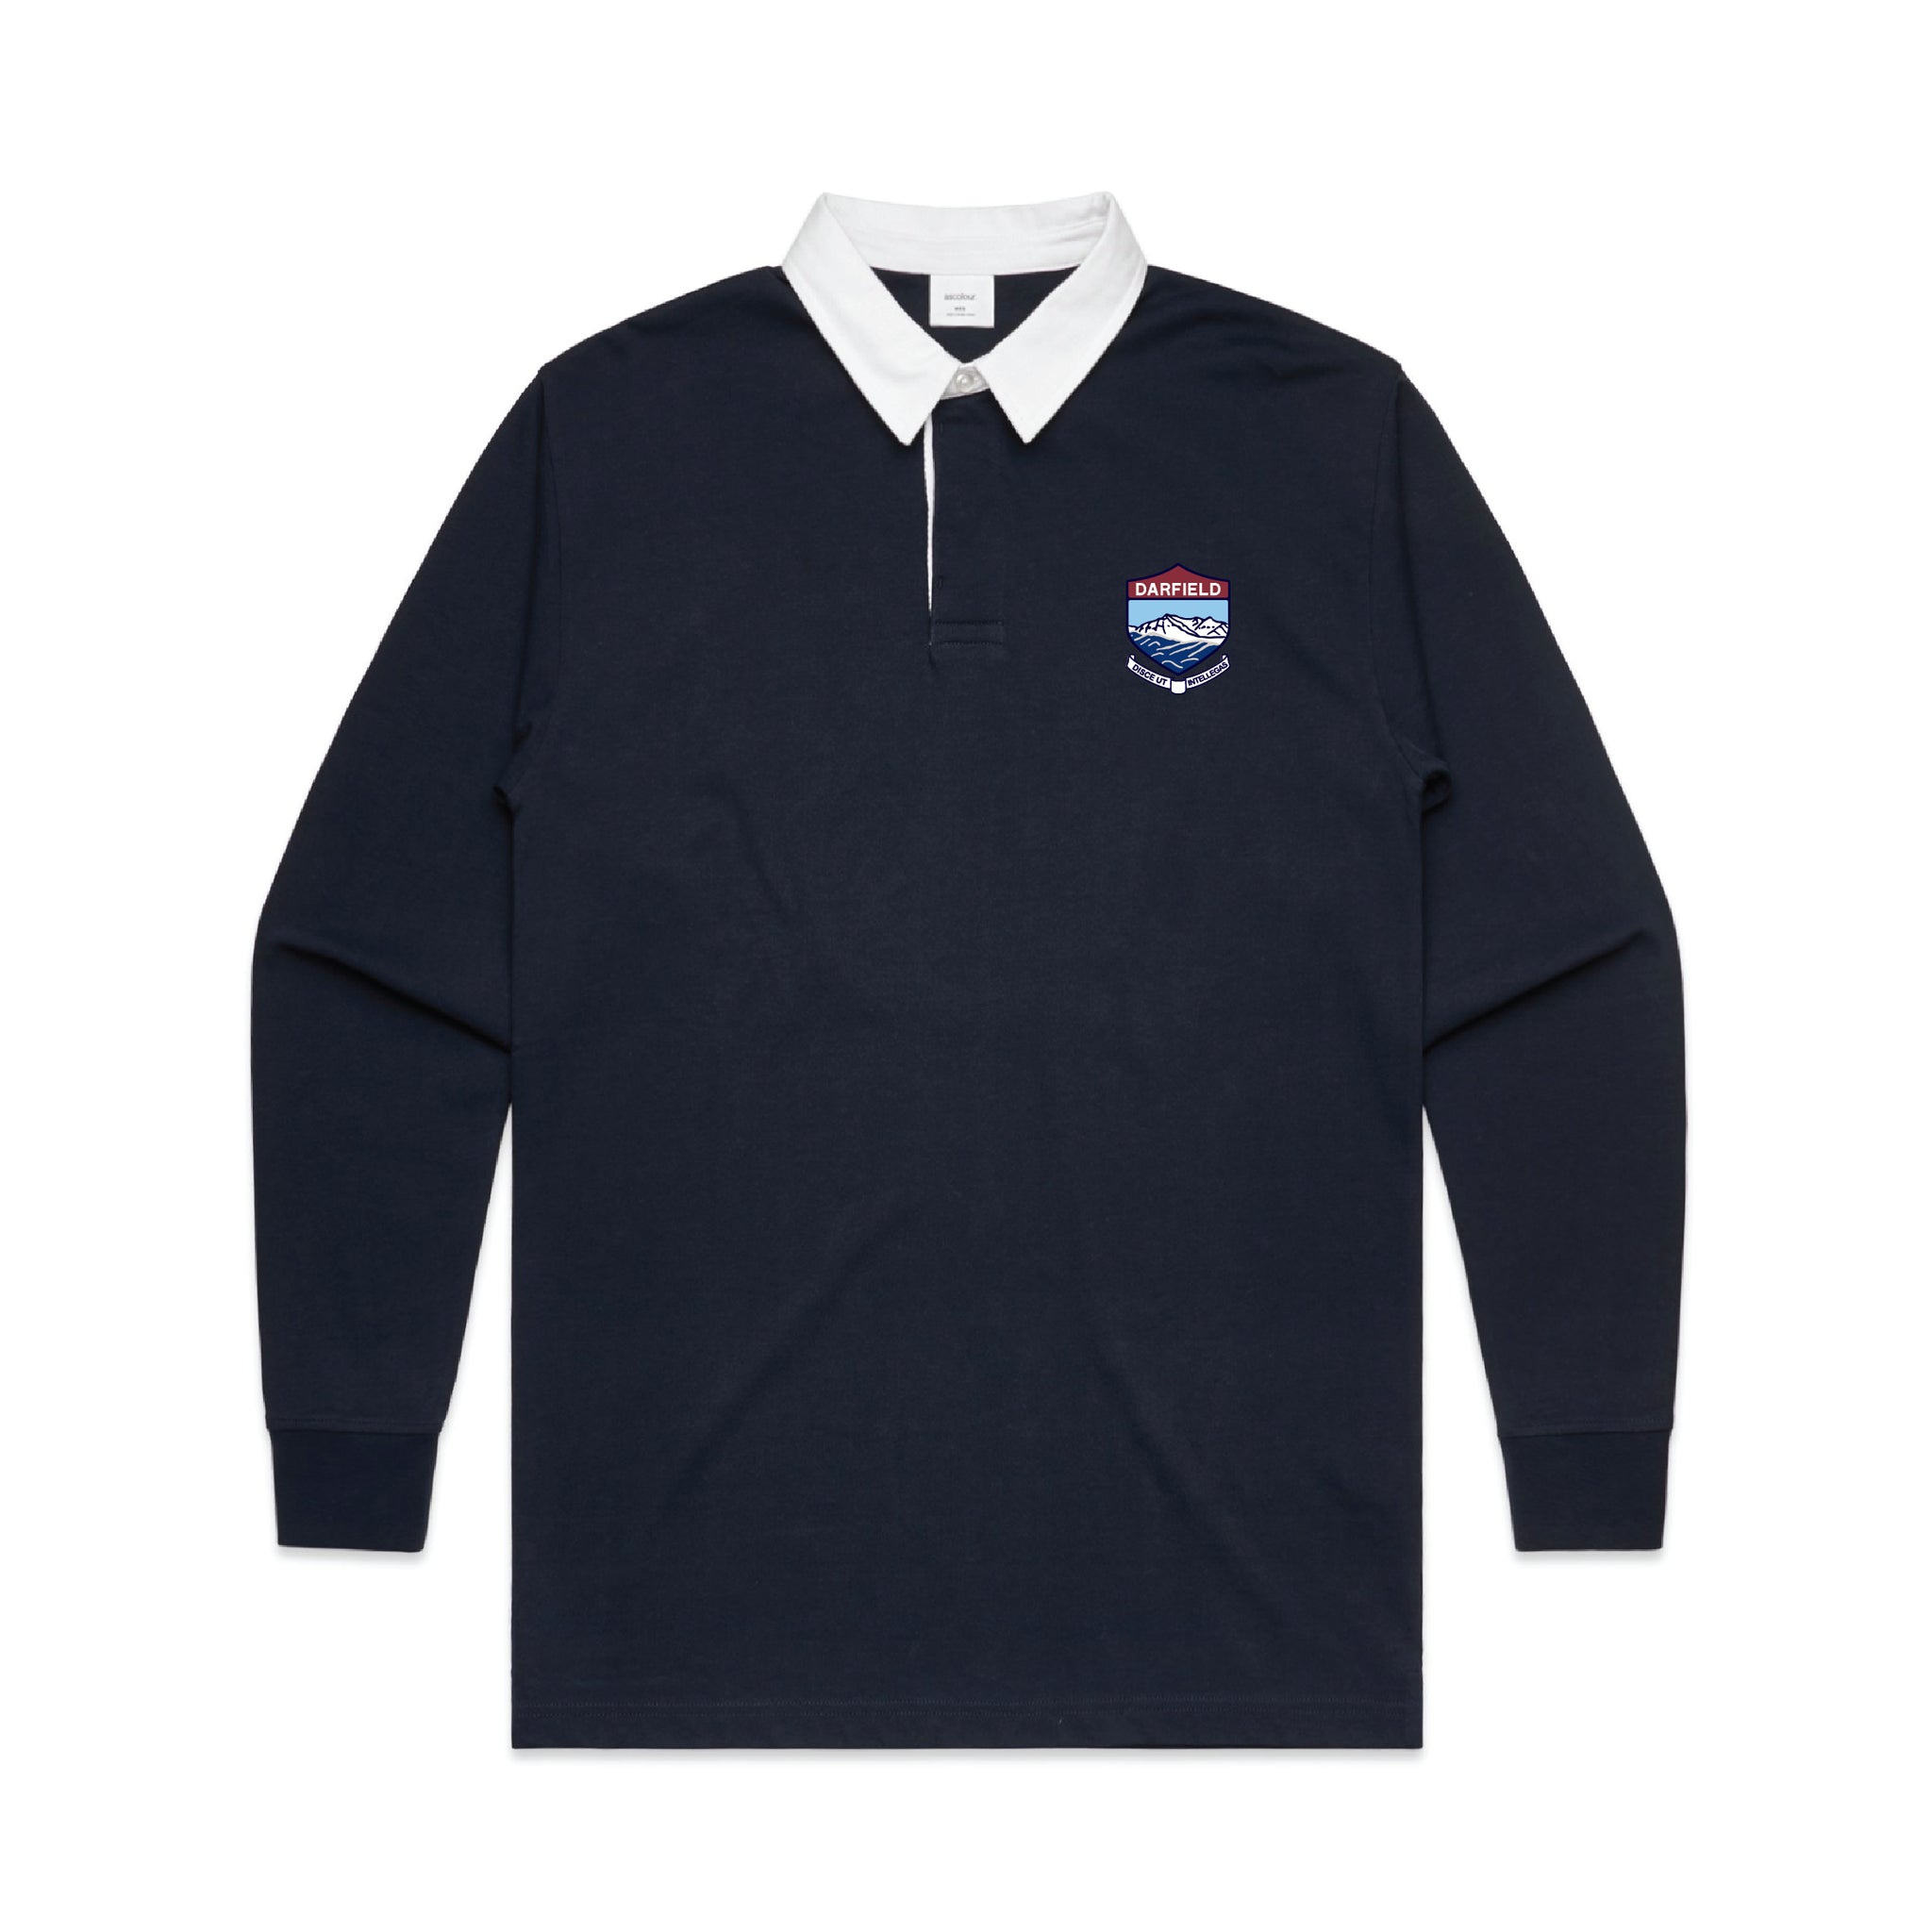 Rugby Jersey - Darfield High School AS Colour Rugby Jersey